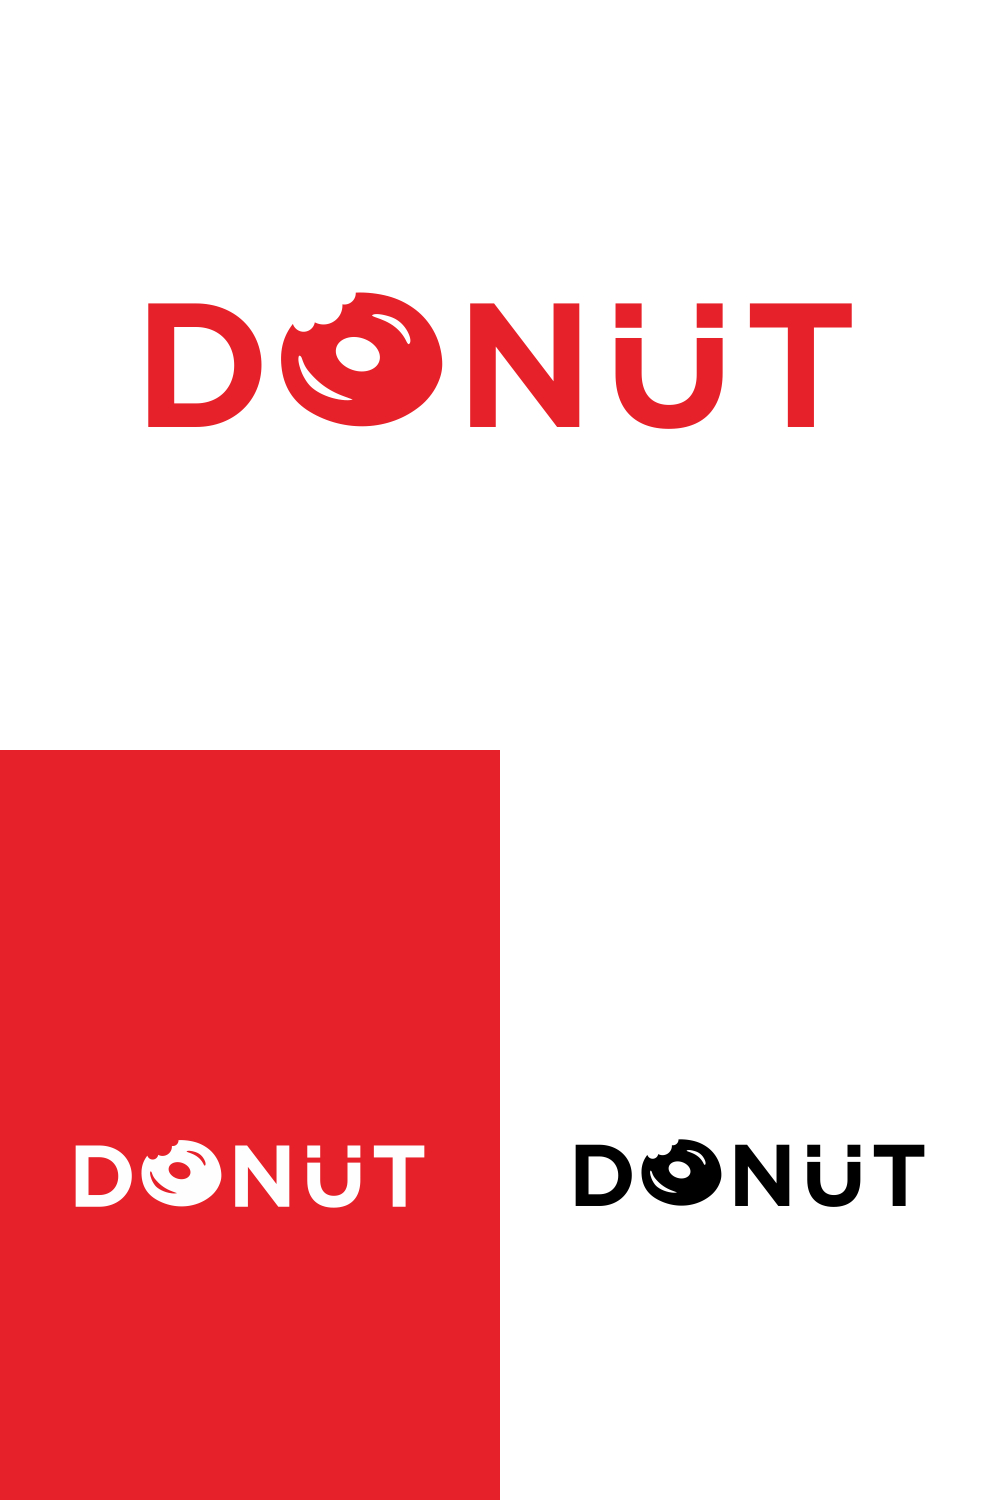 Donut vector logo Sweet food logo, can be used for bakery product logos, trademarks, or food business logos pinterest preview image.